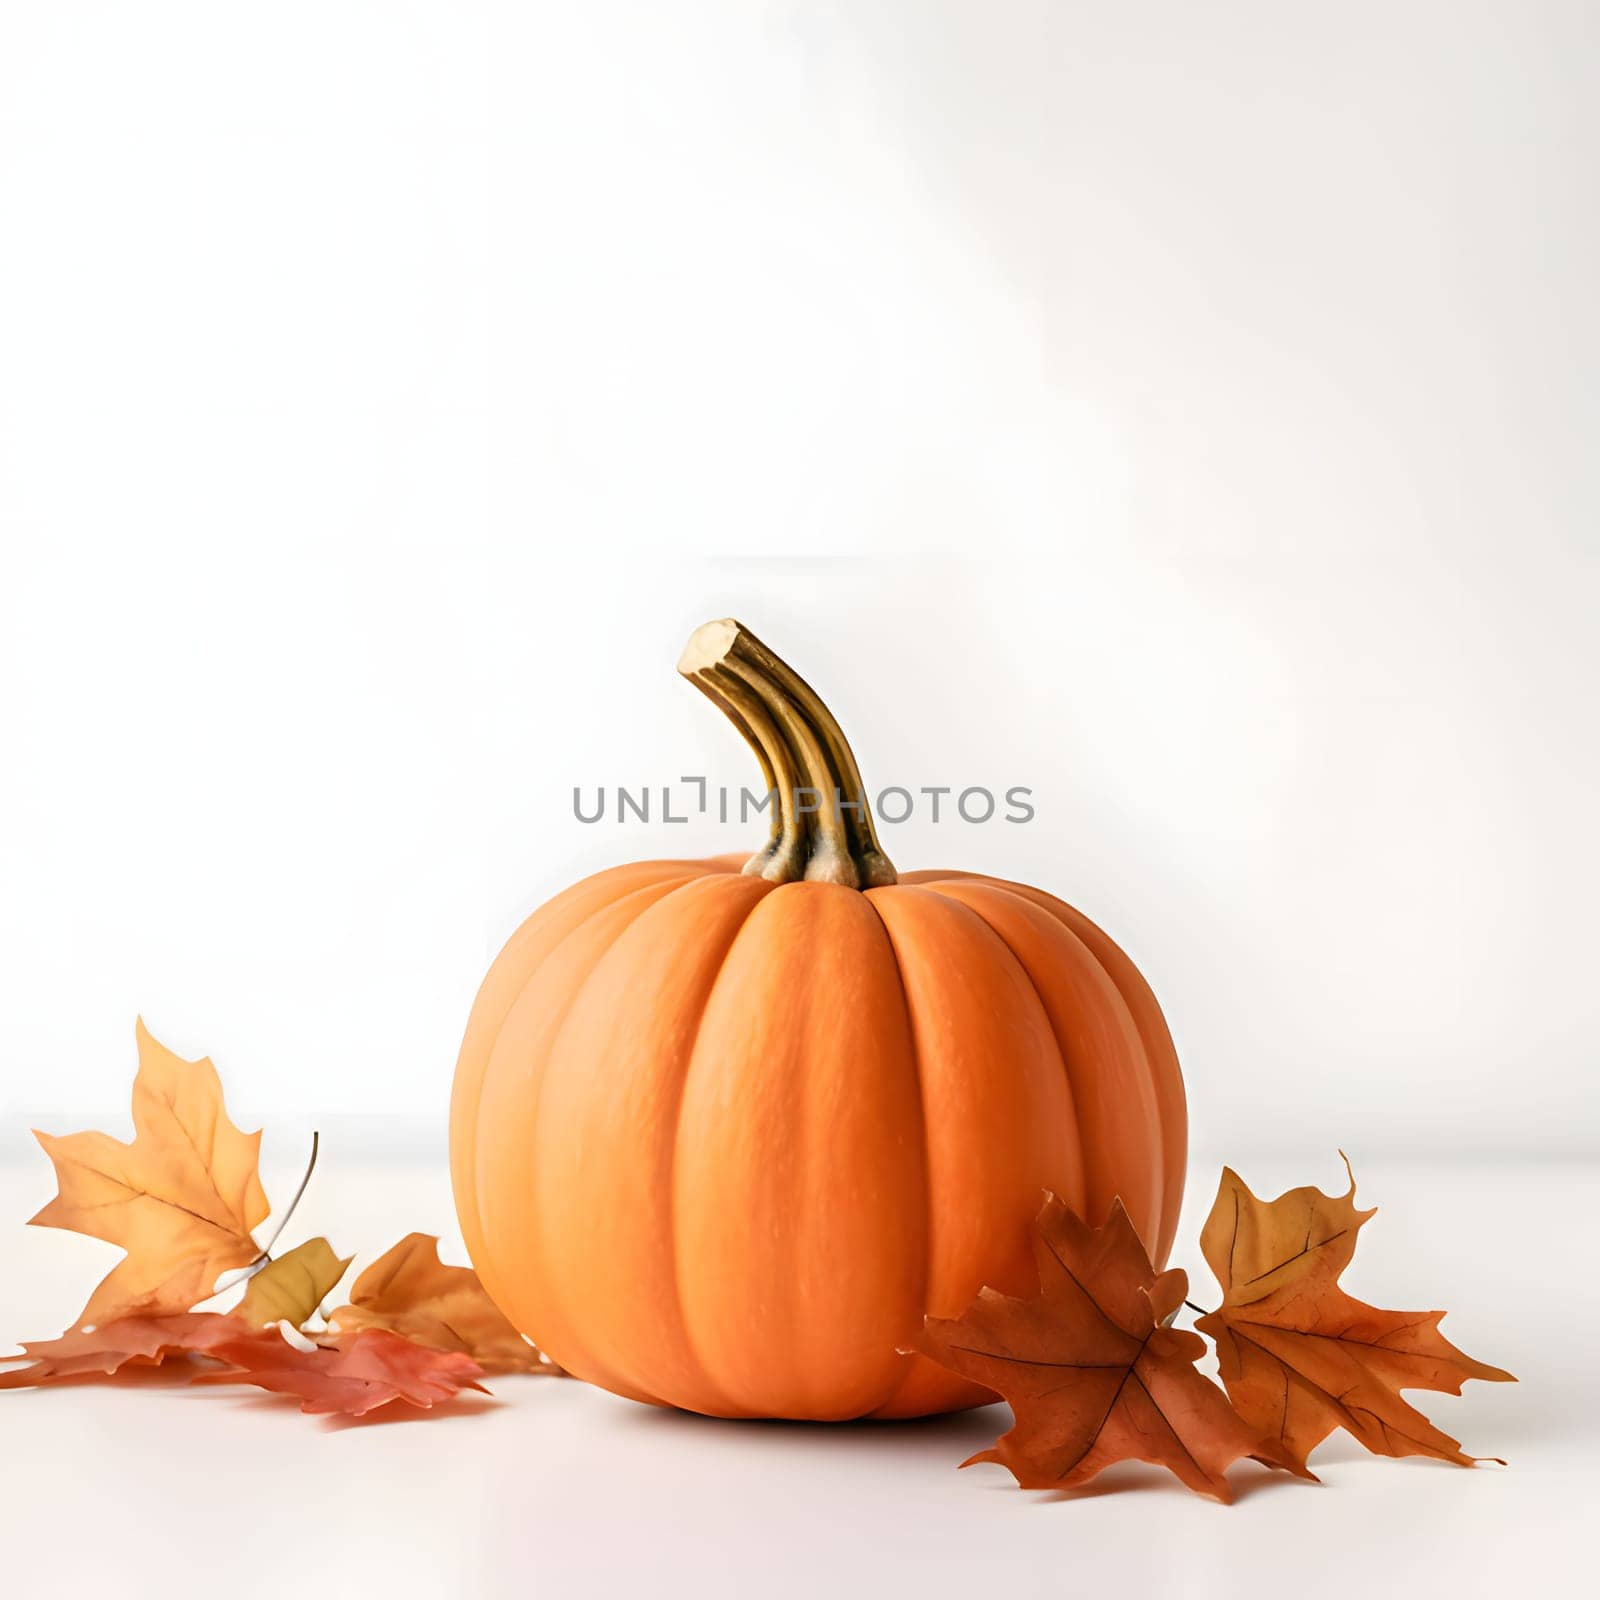 Pumpkin and dry maple leaves. Pumpkin as a dish of thanksgiving for the harvest, picture on a white isolated background. by ThemesS